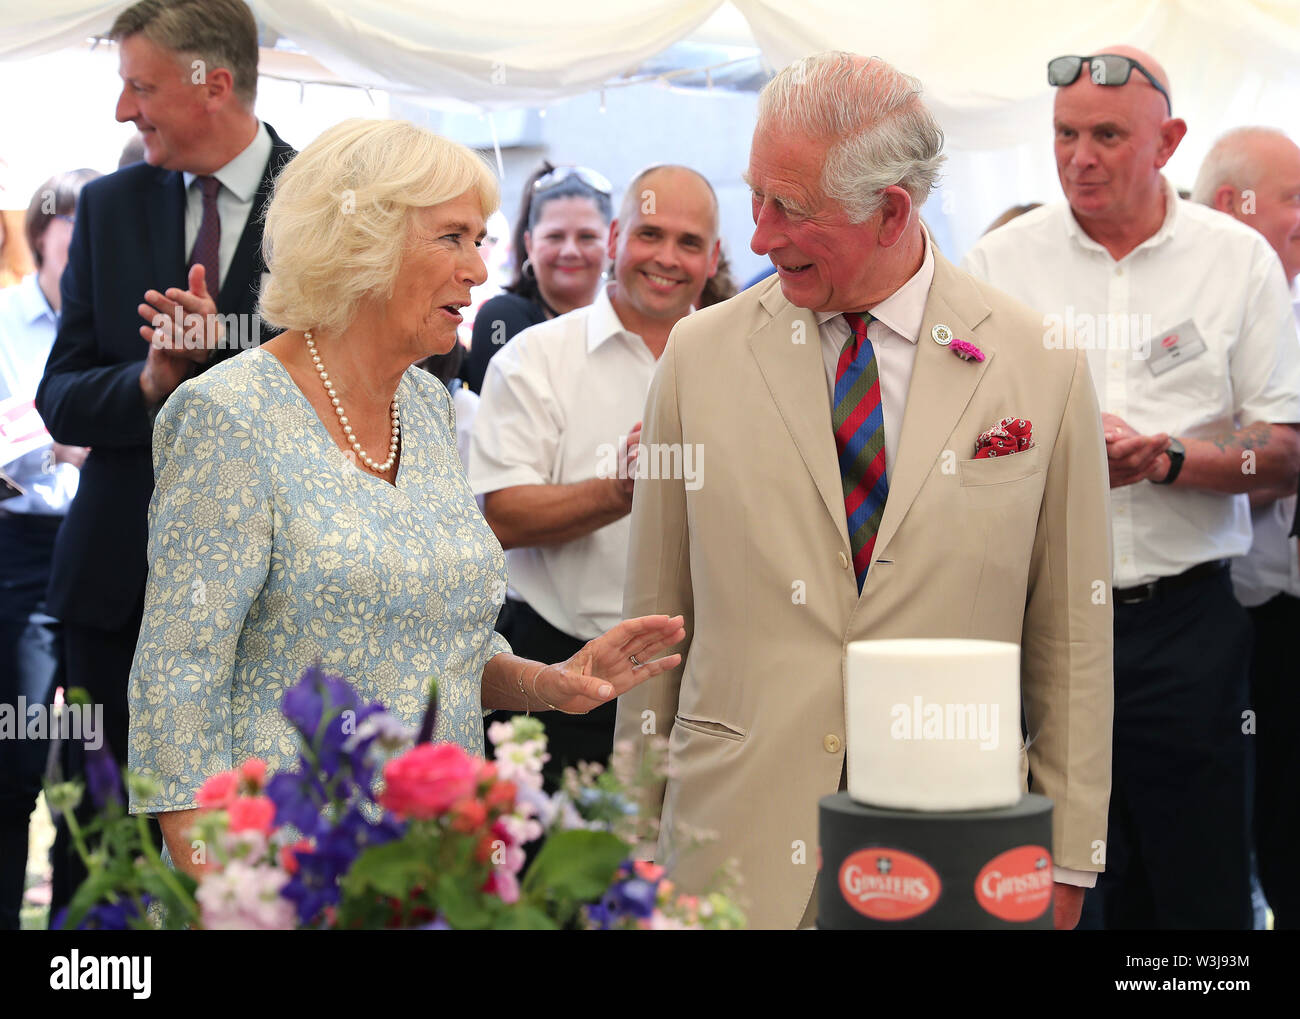 The Prince of Wales and the Duchess of Cornwall during a garden party to celebrate the 50th anniversary of Ginsters bakery in Callington, as part of their visit to Cornwall. Stock Photo